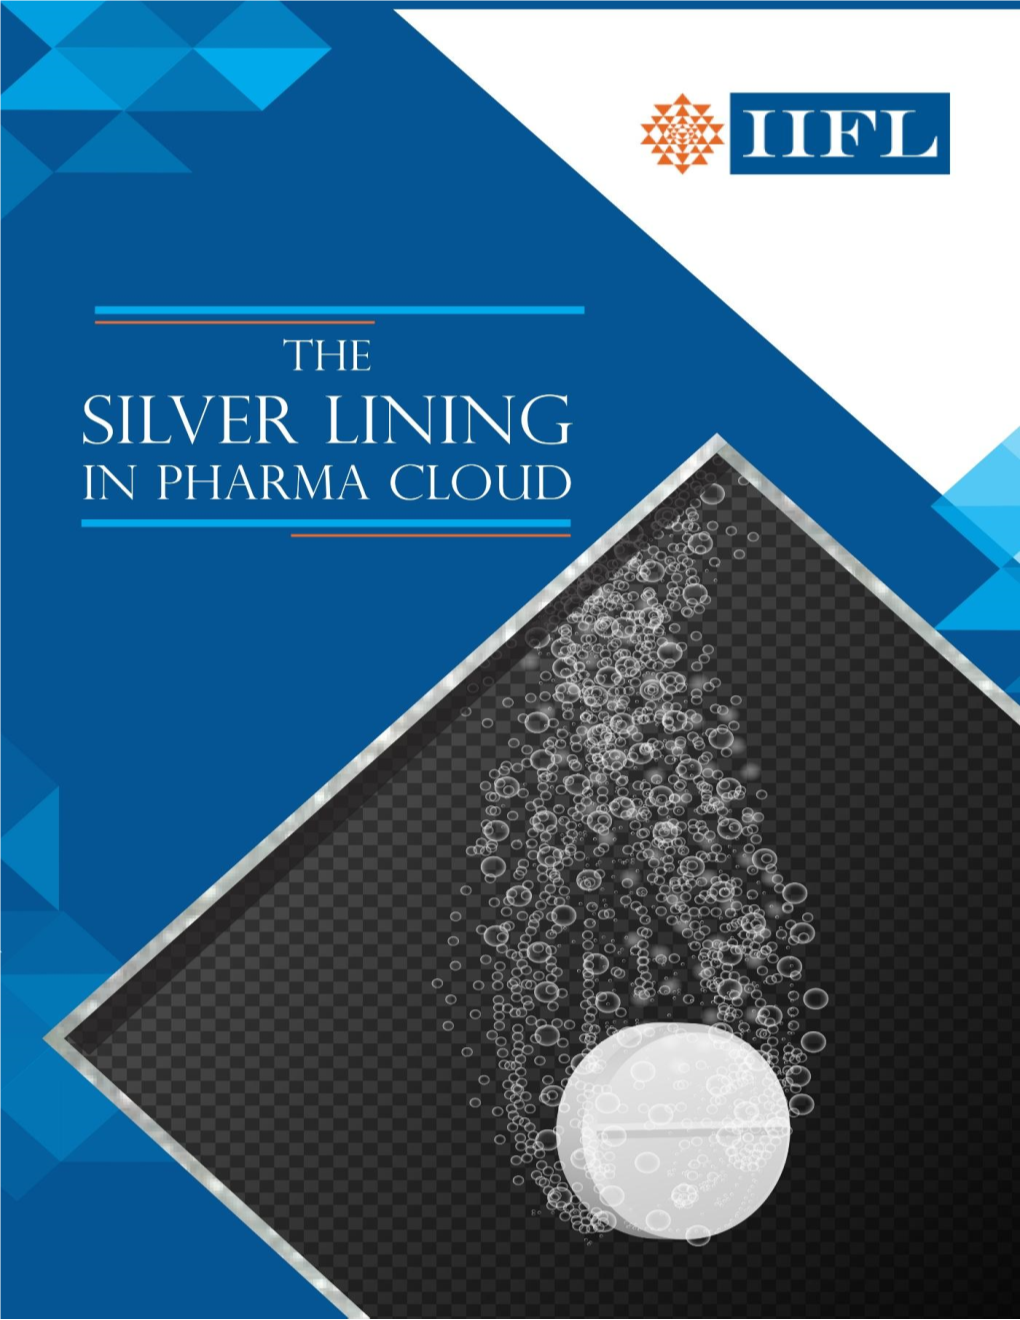 The Silver Lining in Pharma Cloud